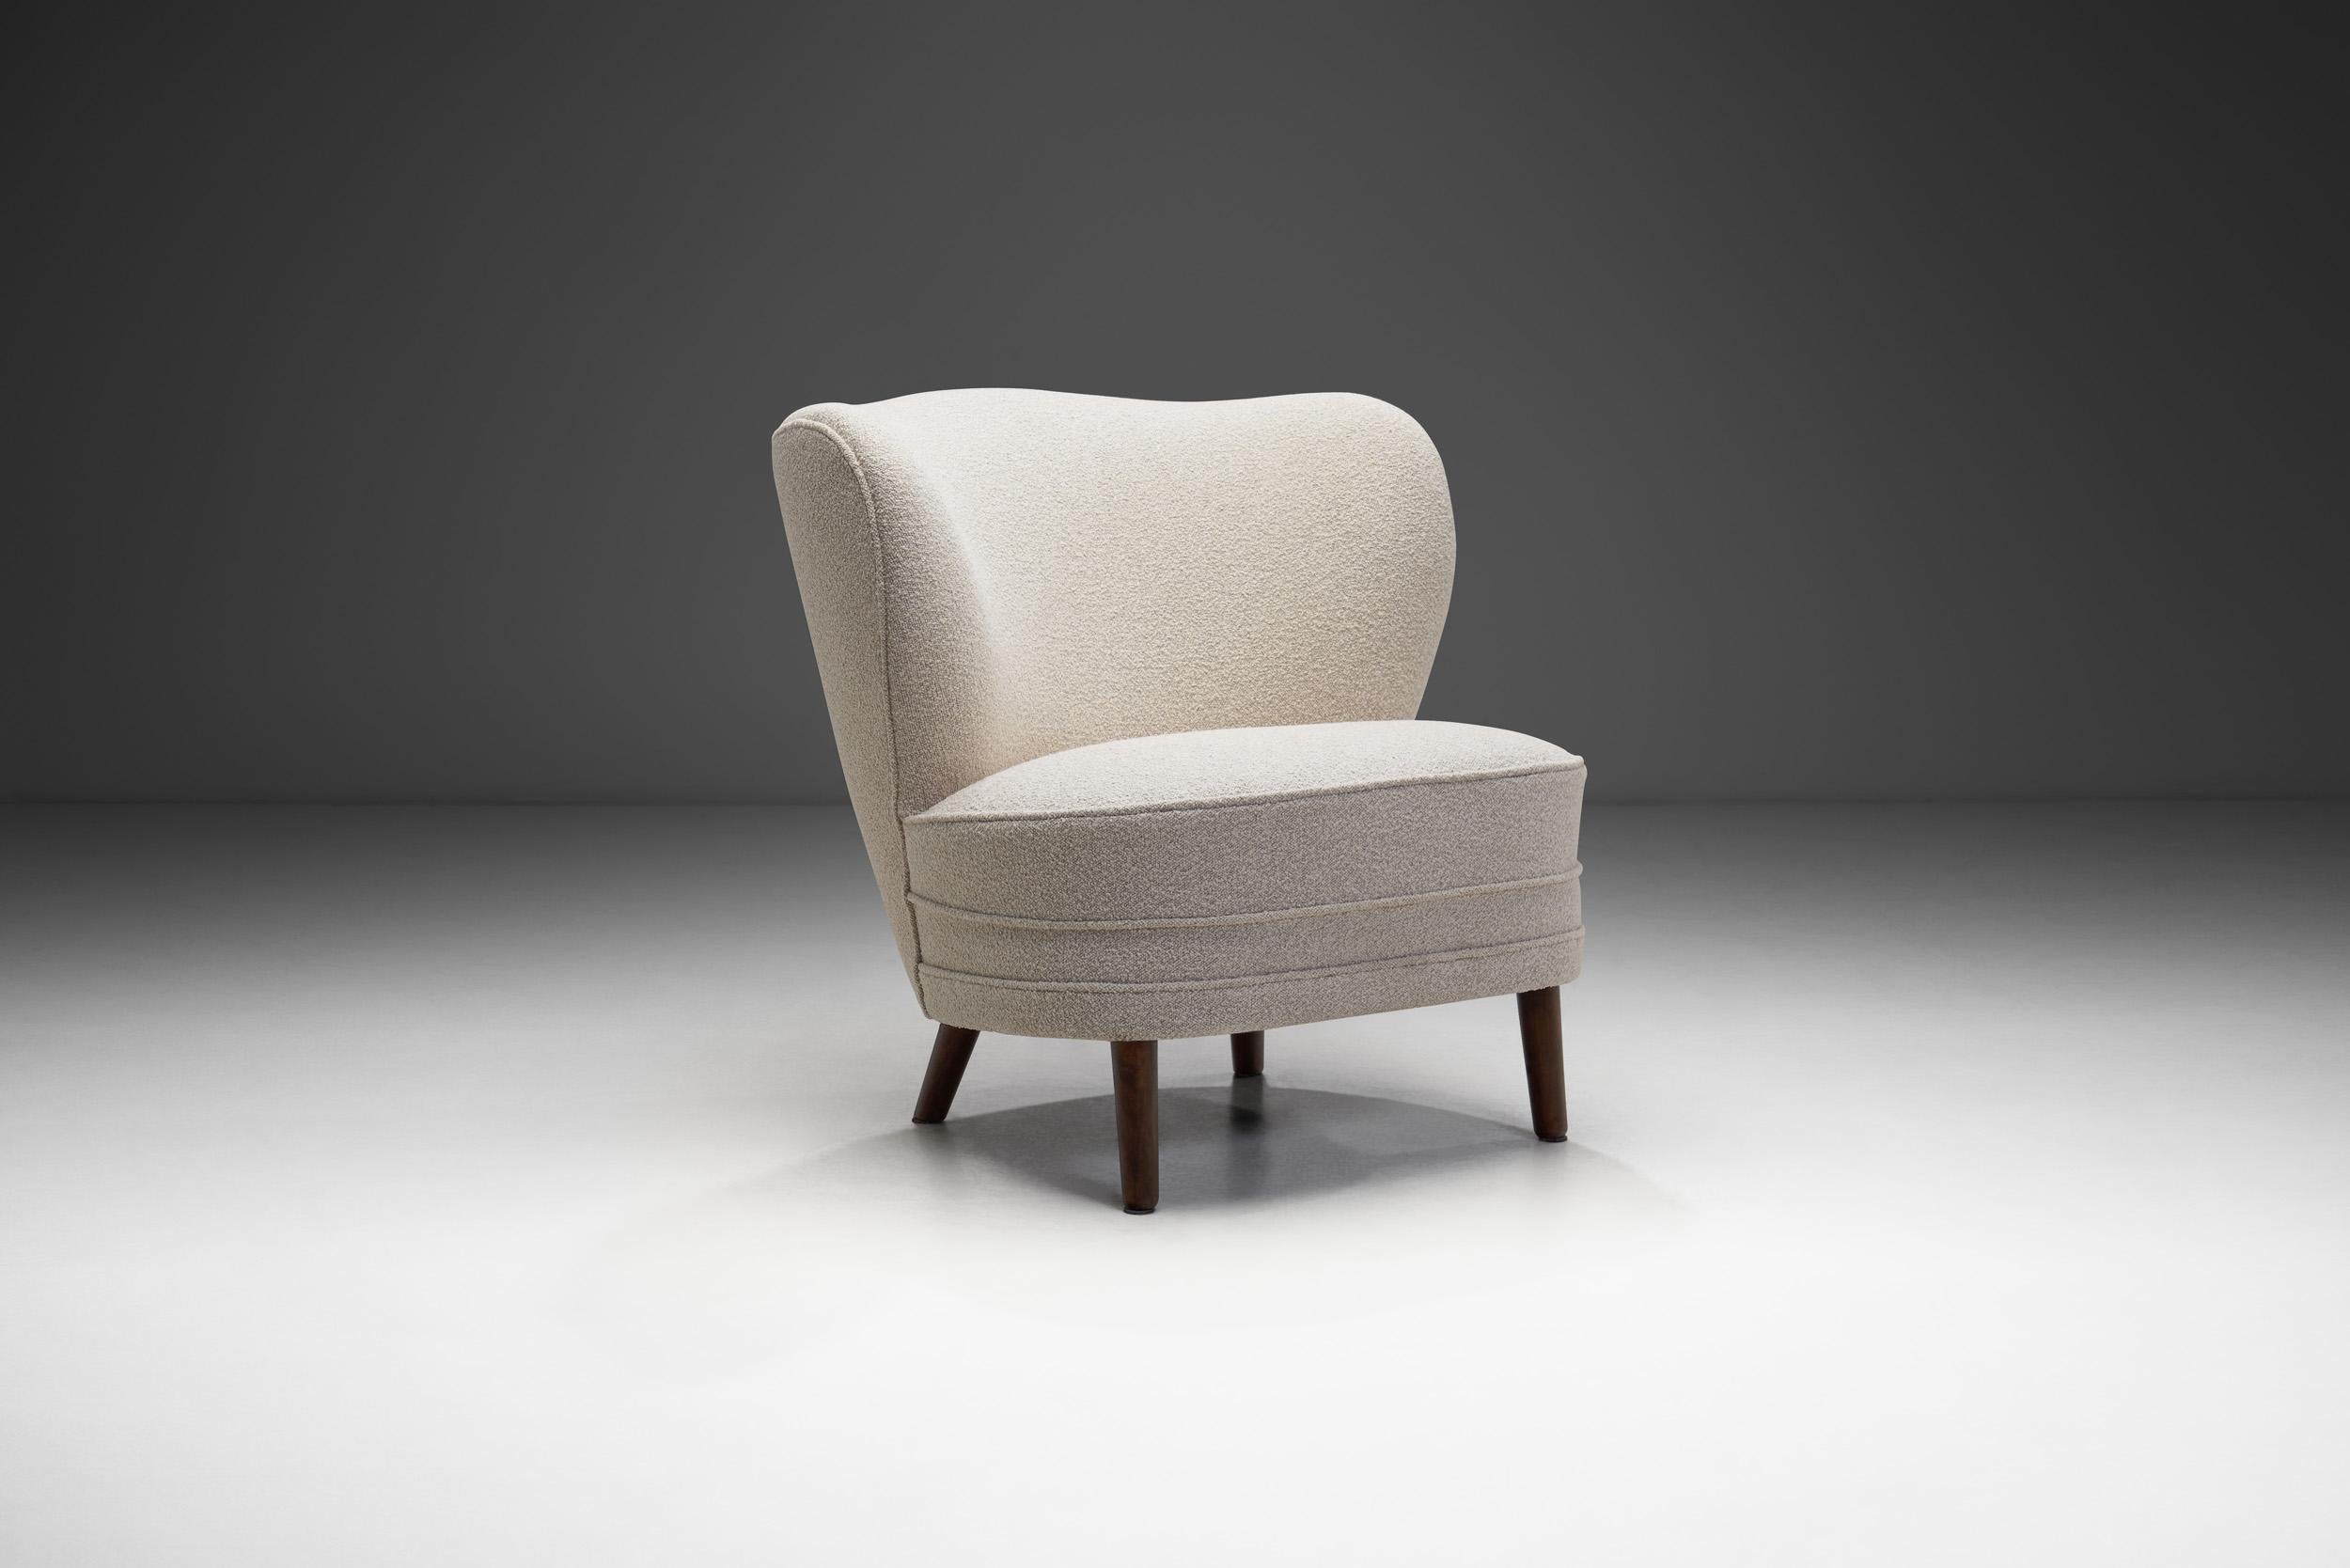 Scandinavian design is a distinctive style that represents a design philosophy guided by functionality, simplicity and clean lines. The maker of this lounge chair not only had a preference for Scandinavian design’s main characteristics and